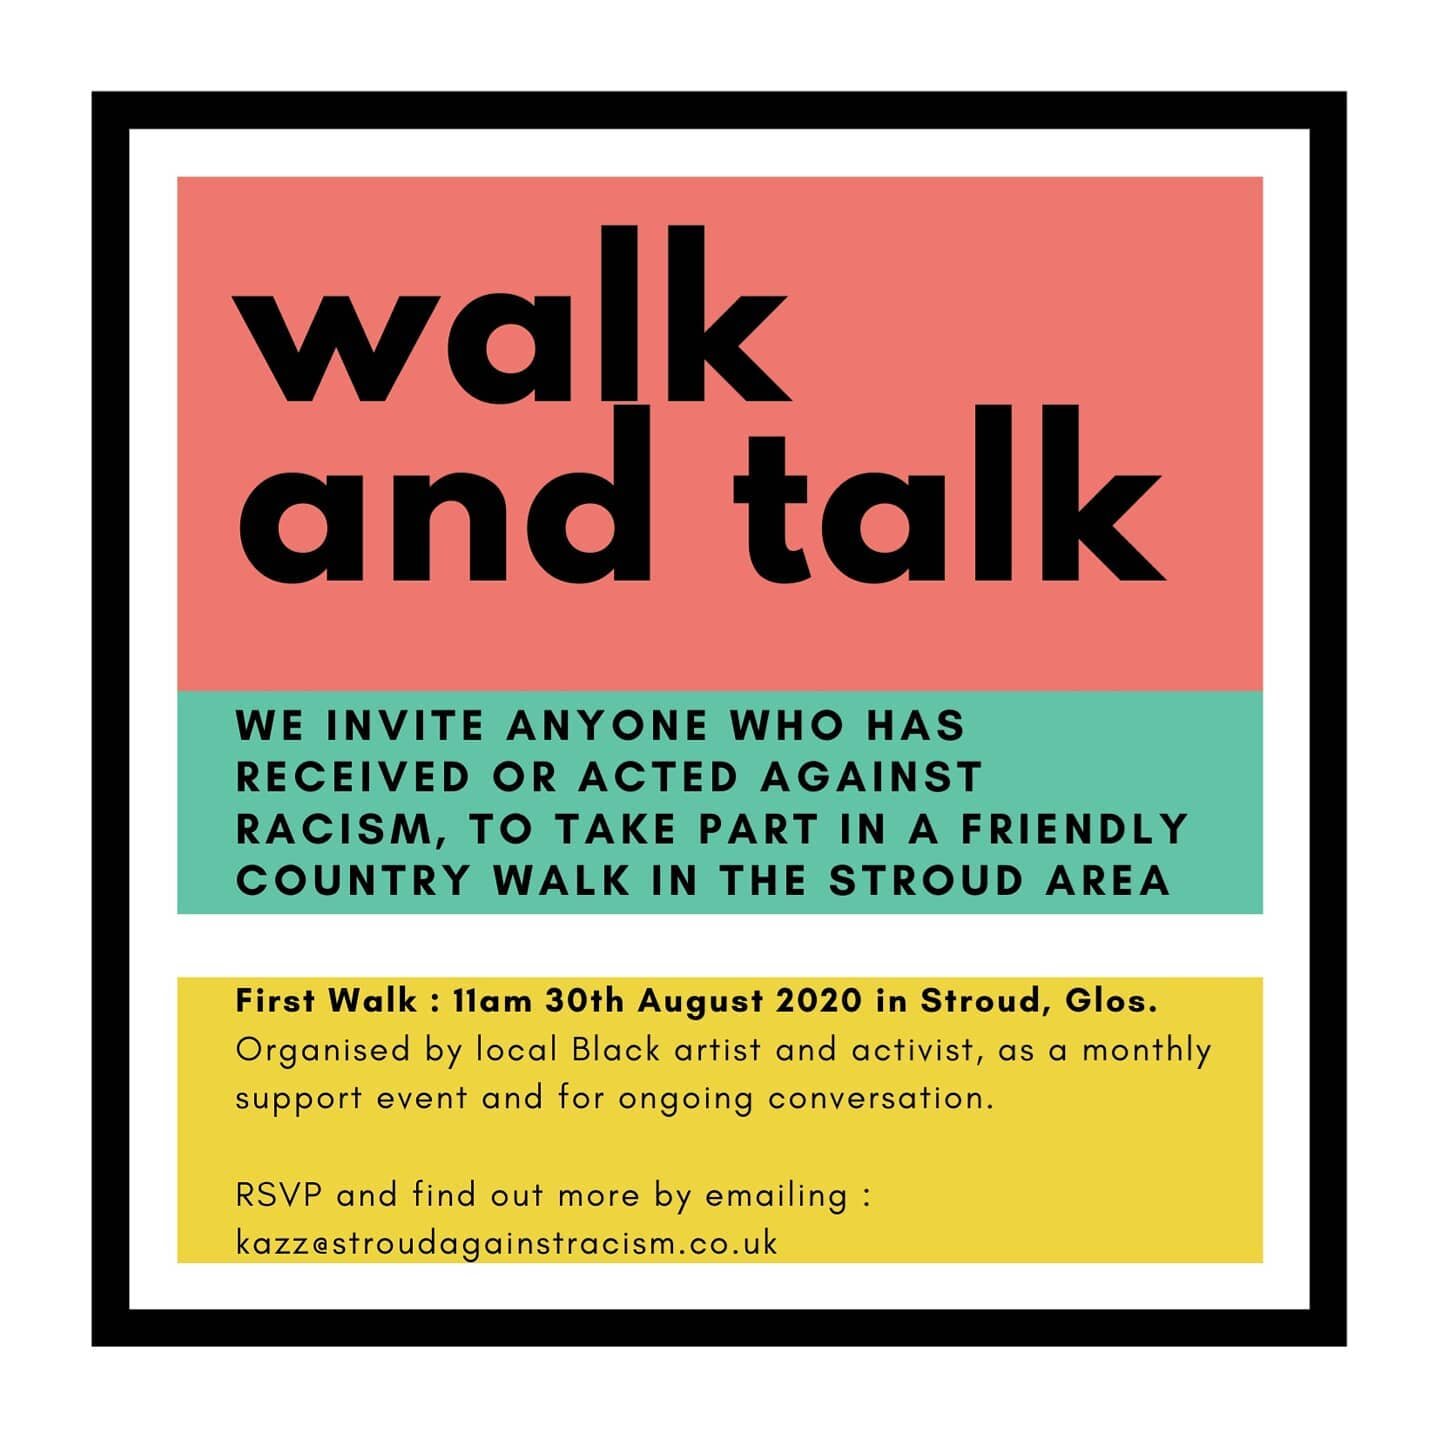 Invitation for Stroud Folk 🌞

We would like to invite anyone who has received or acted against racism, to take part in a friendly country walk in the Stroud area. Organised by Stroud-based artist and activist Helen Wilson-Roe, this will happen once 